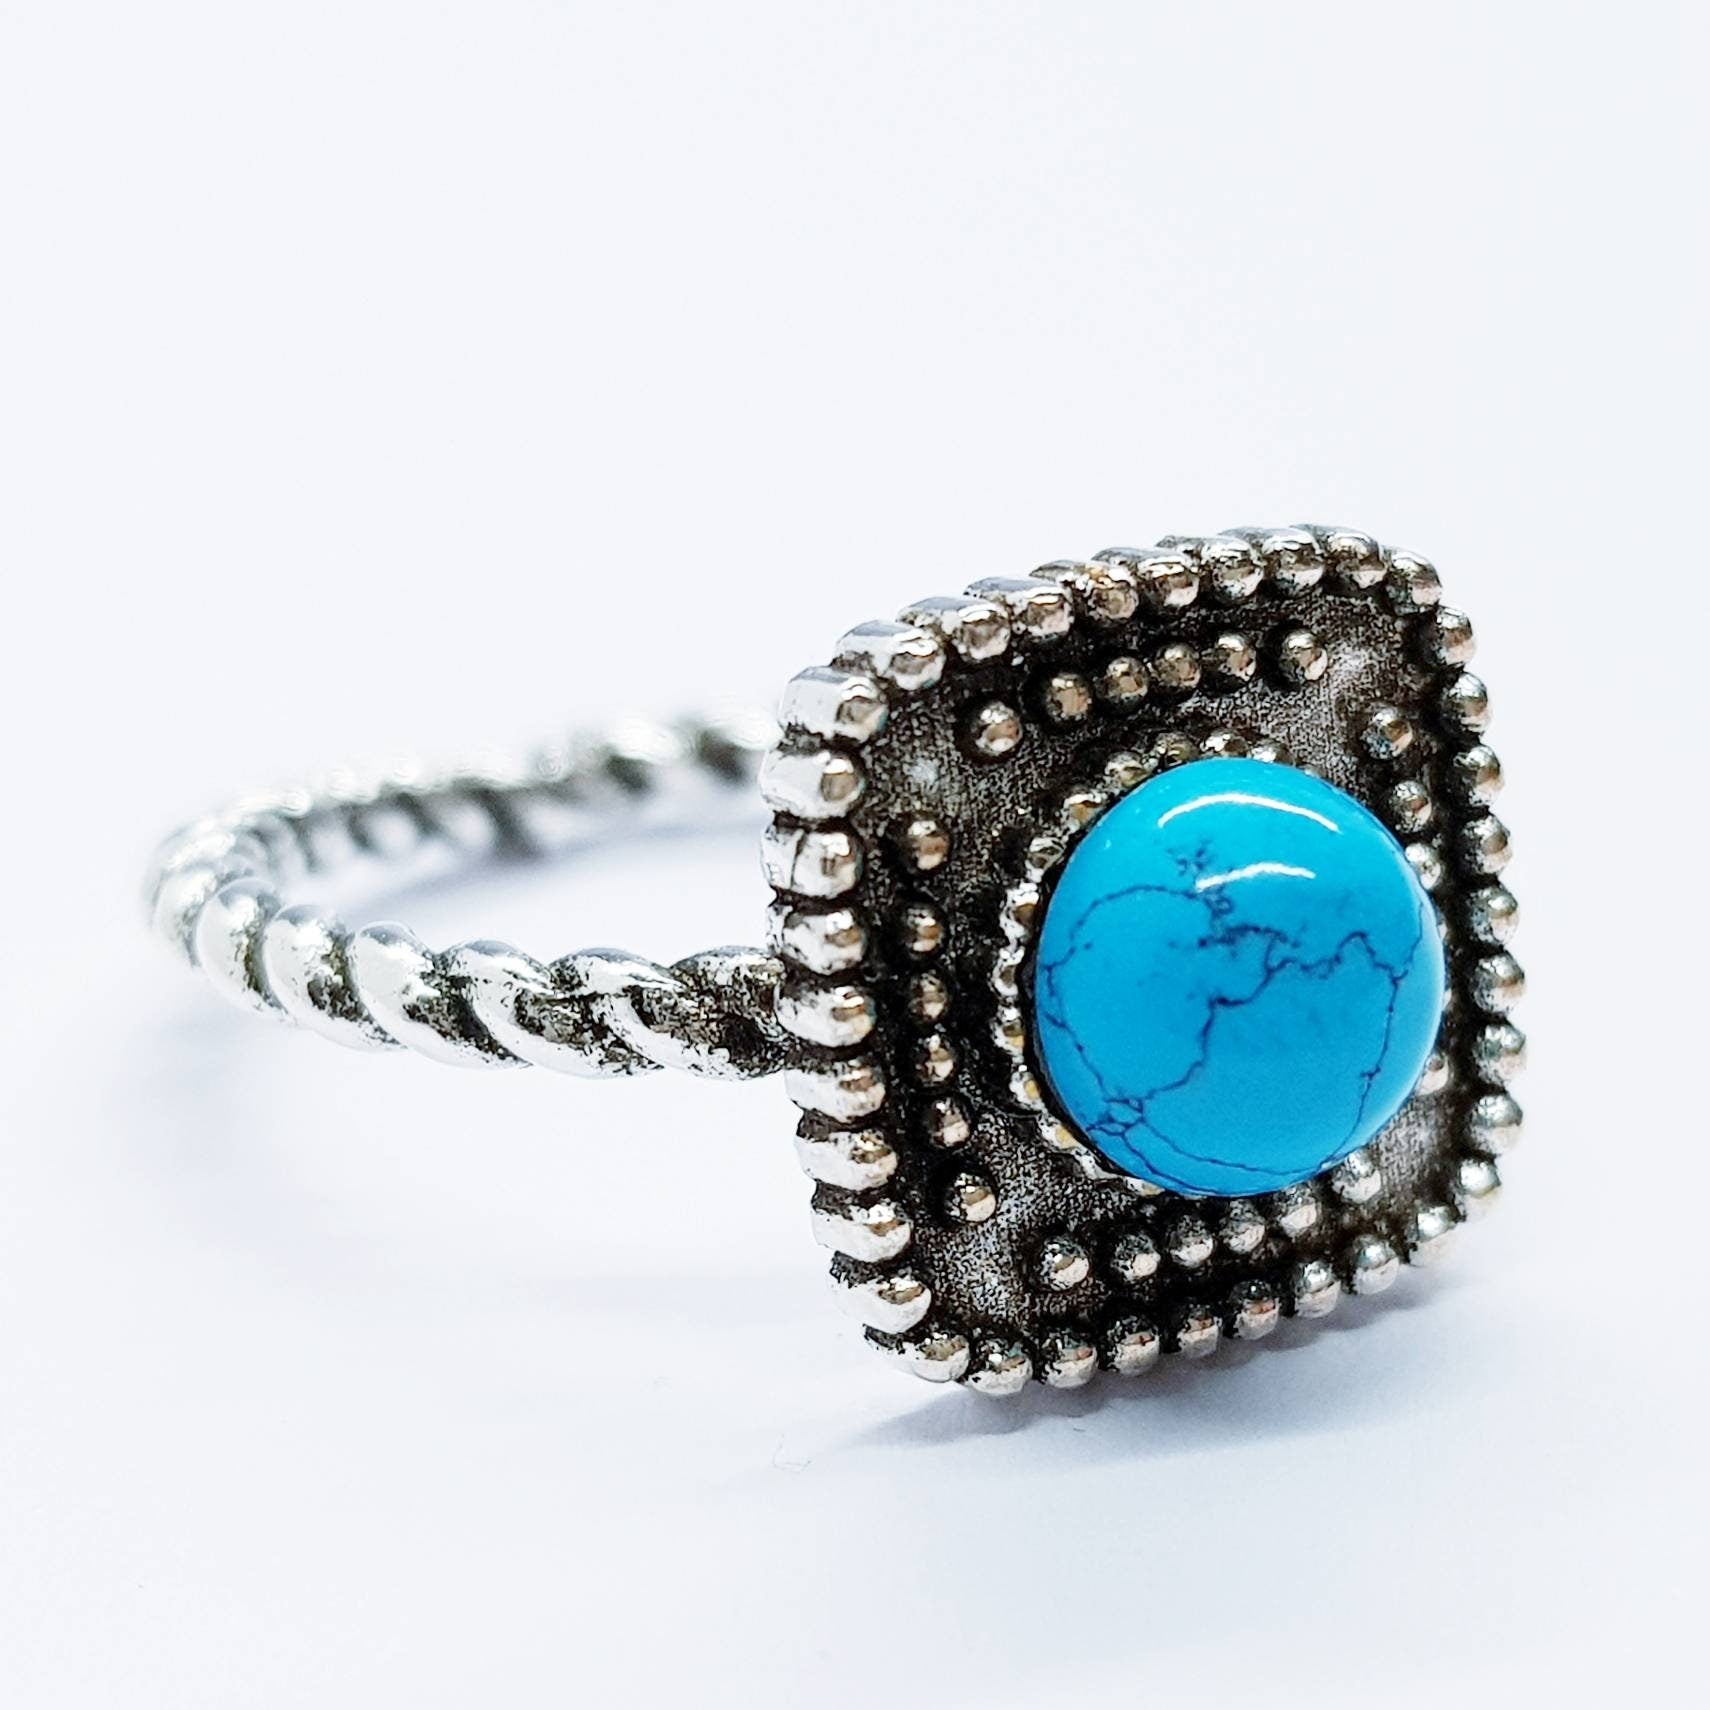 Turquoise boho Ring, silver turquoise ring, adjustable ring, gift for her